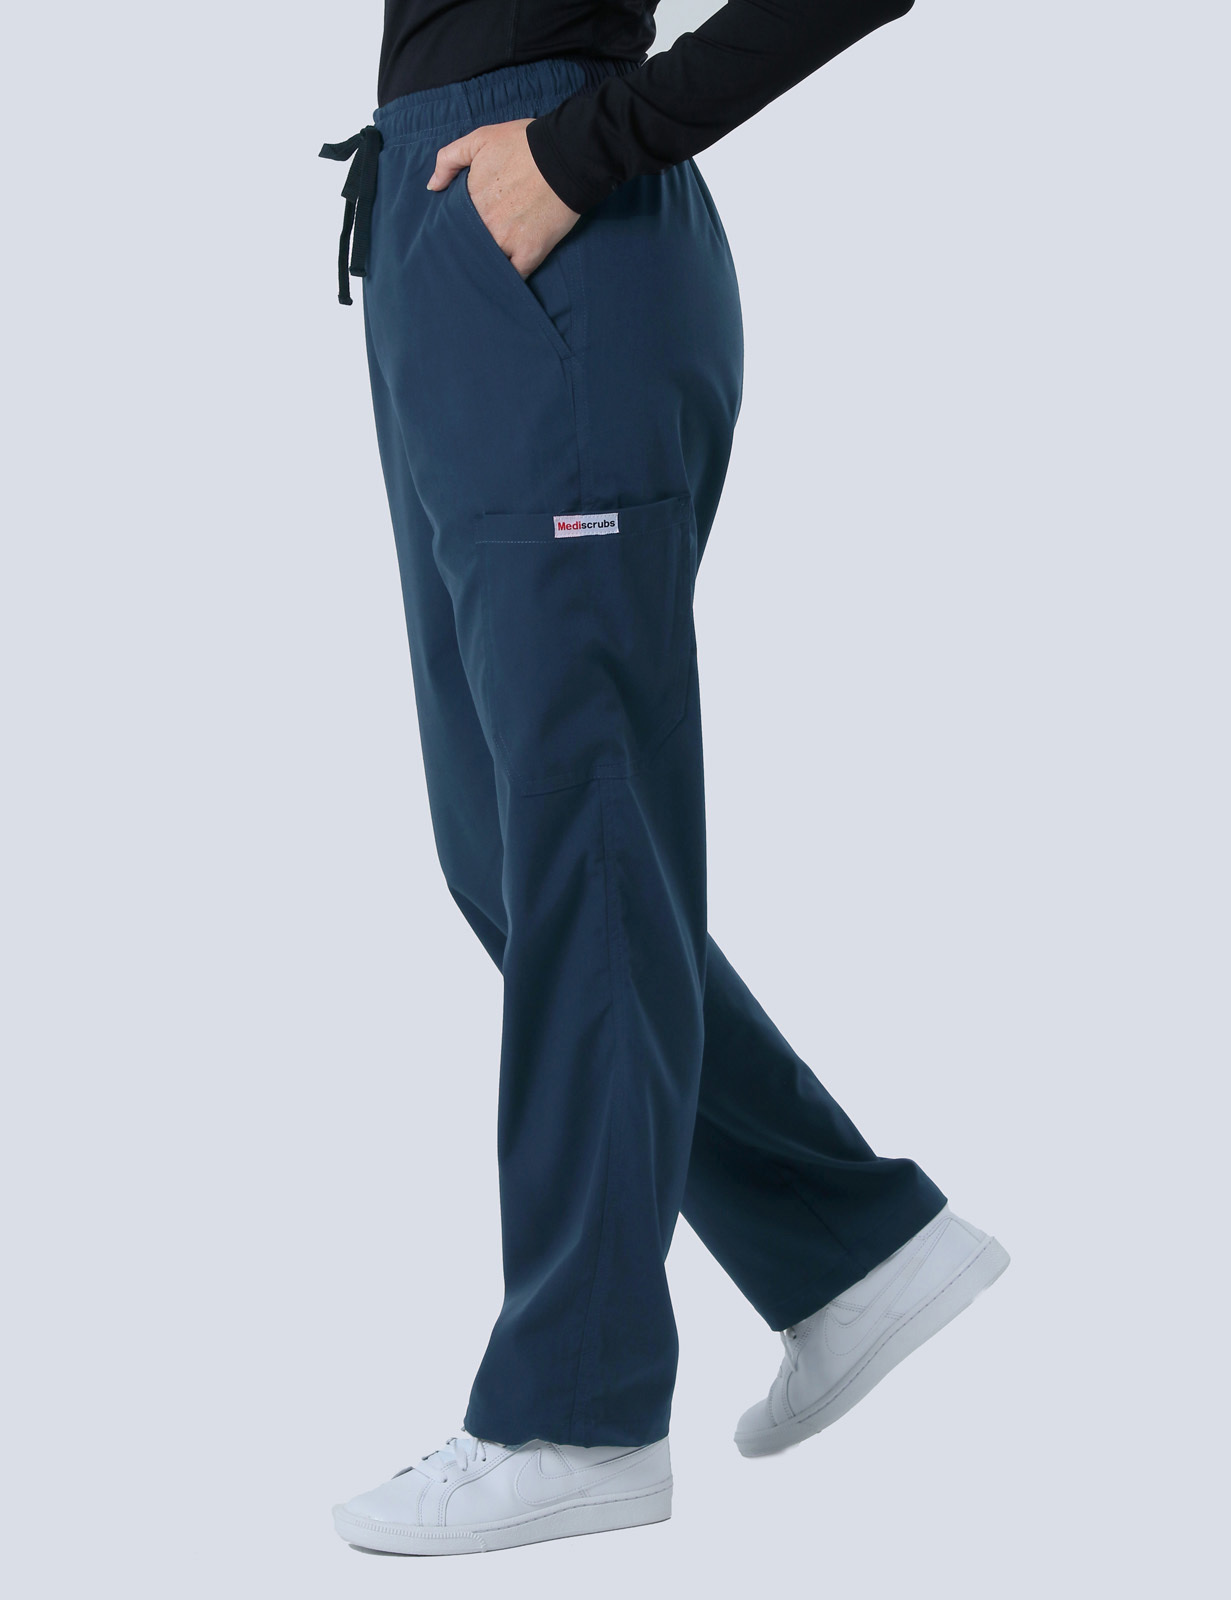 PAH - Vascular Sonographer (Women's Fit Spandex Scrub Top and Cargo Pants in Navy incl Logos)